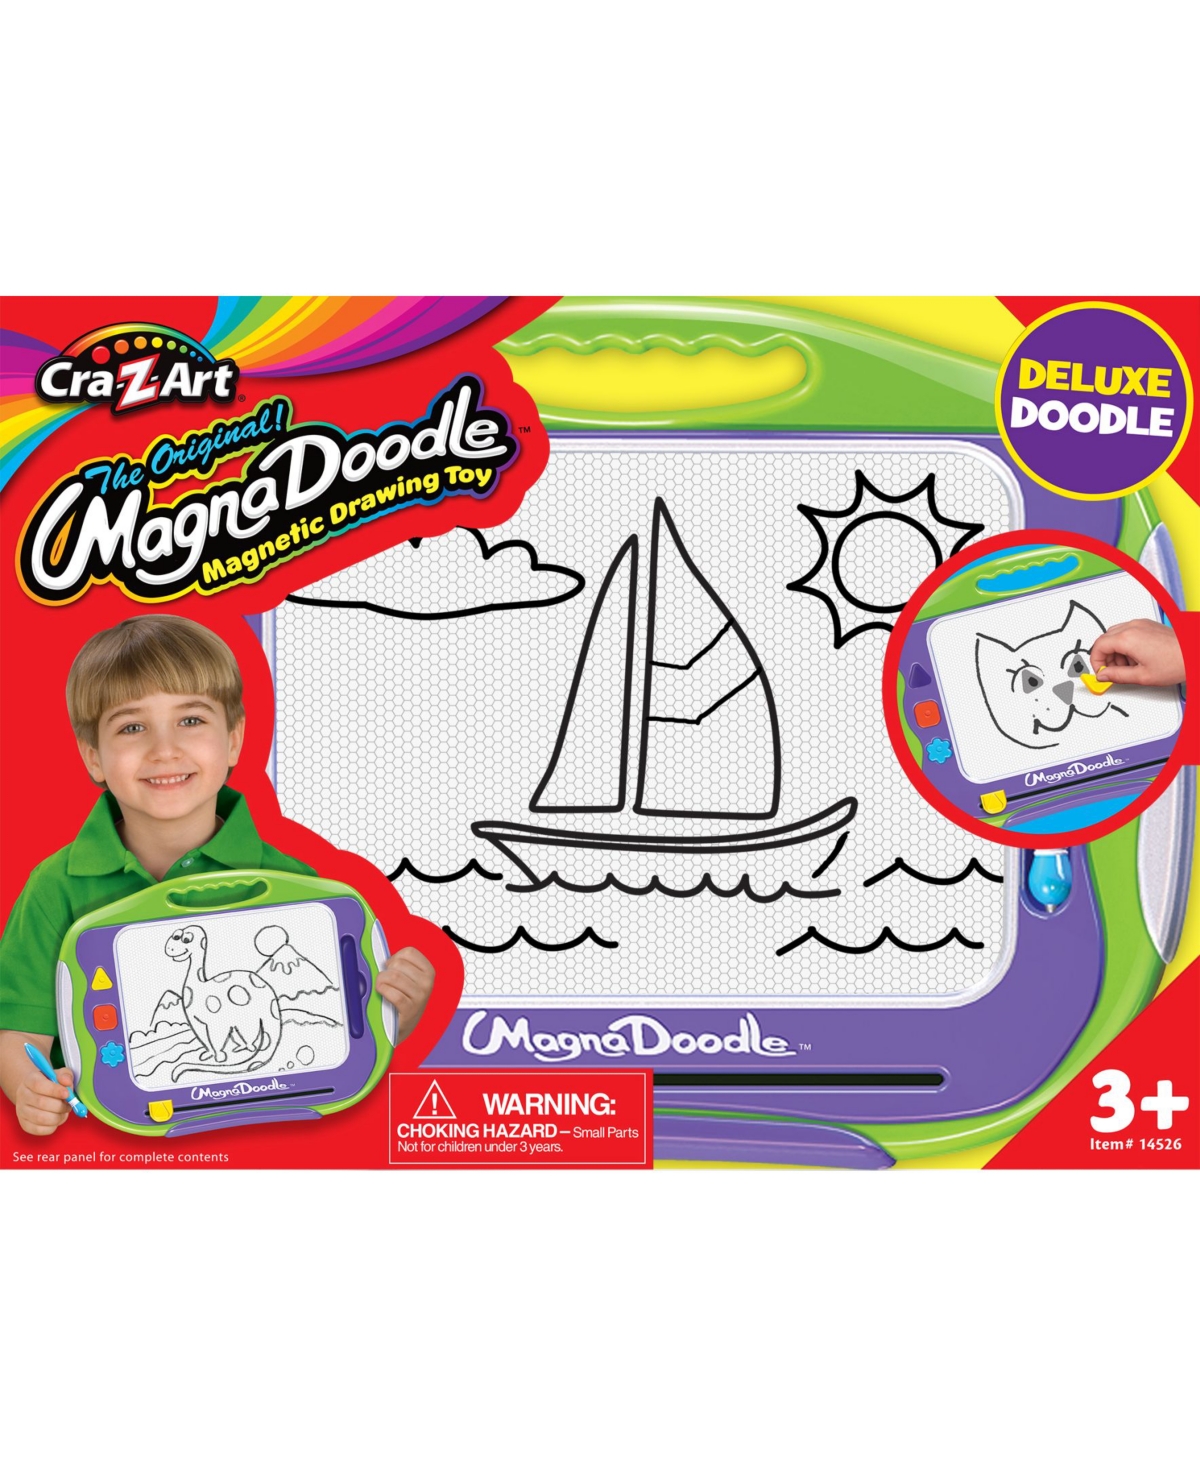 Cra Z Art The Original Magna Doodle Magnetic Drawing Toy - Multi